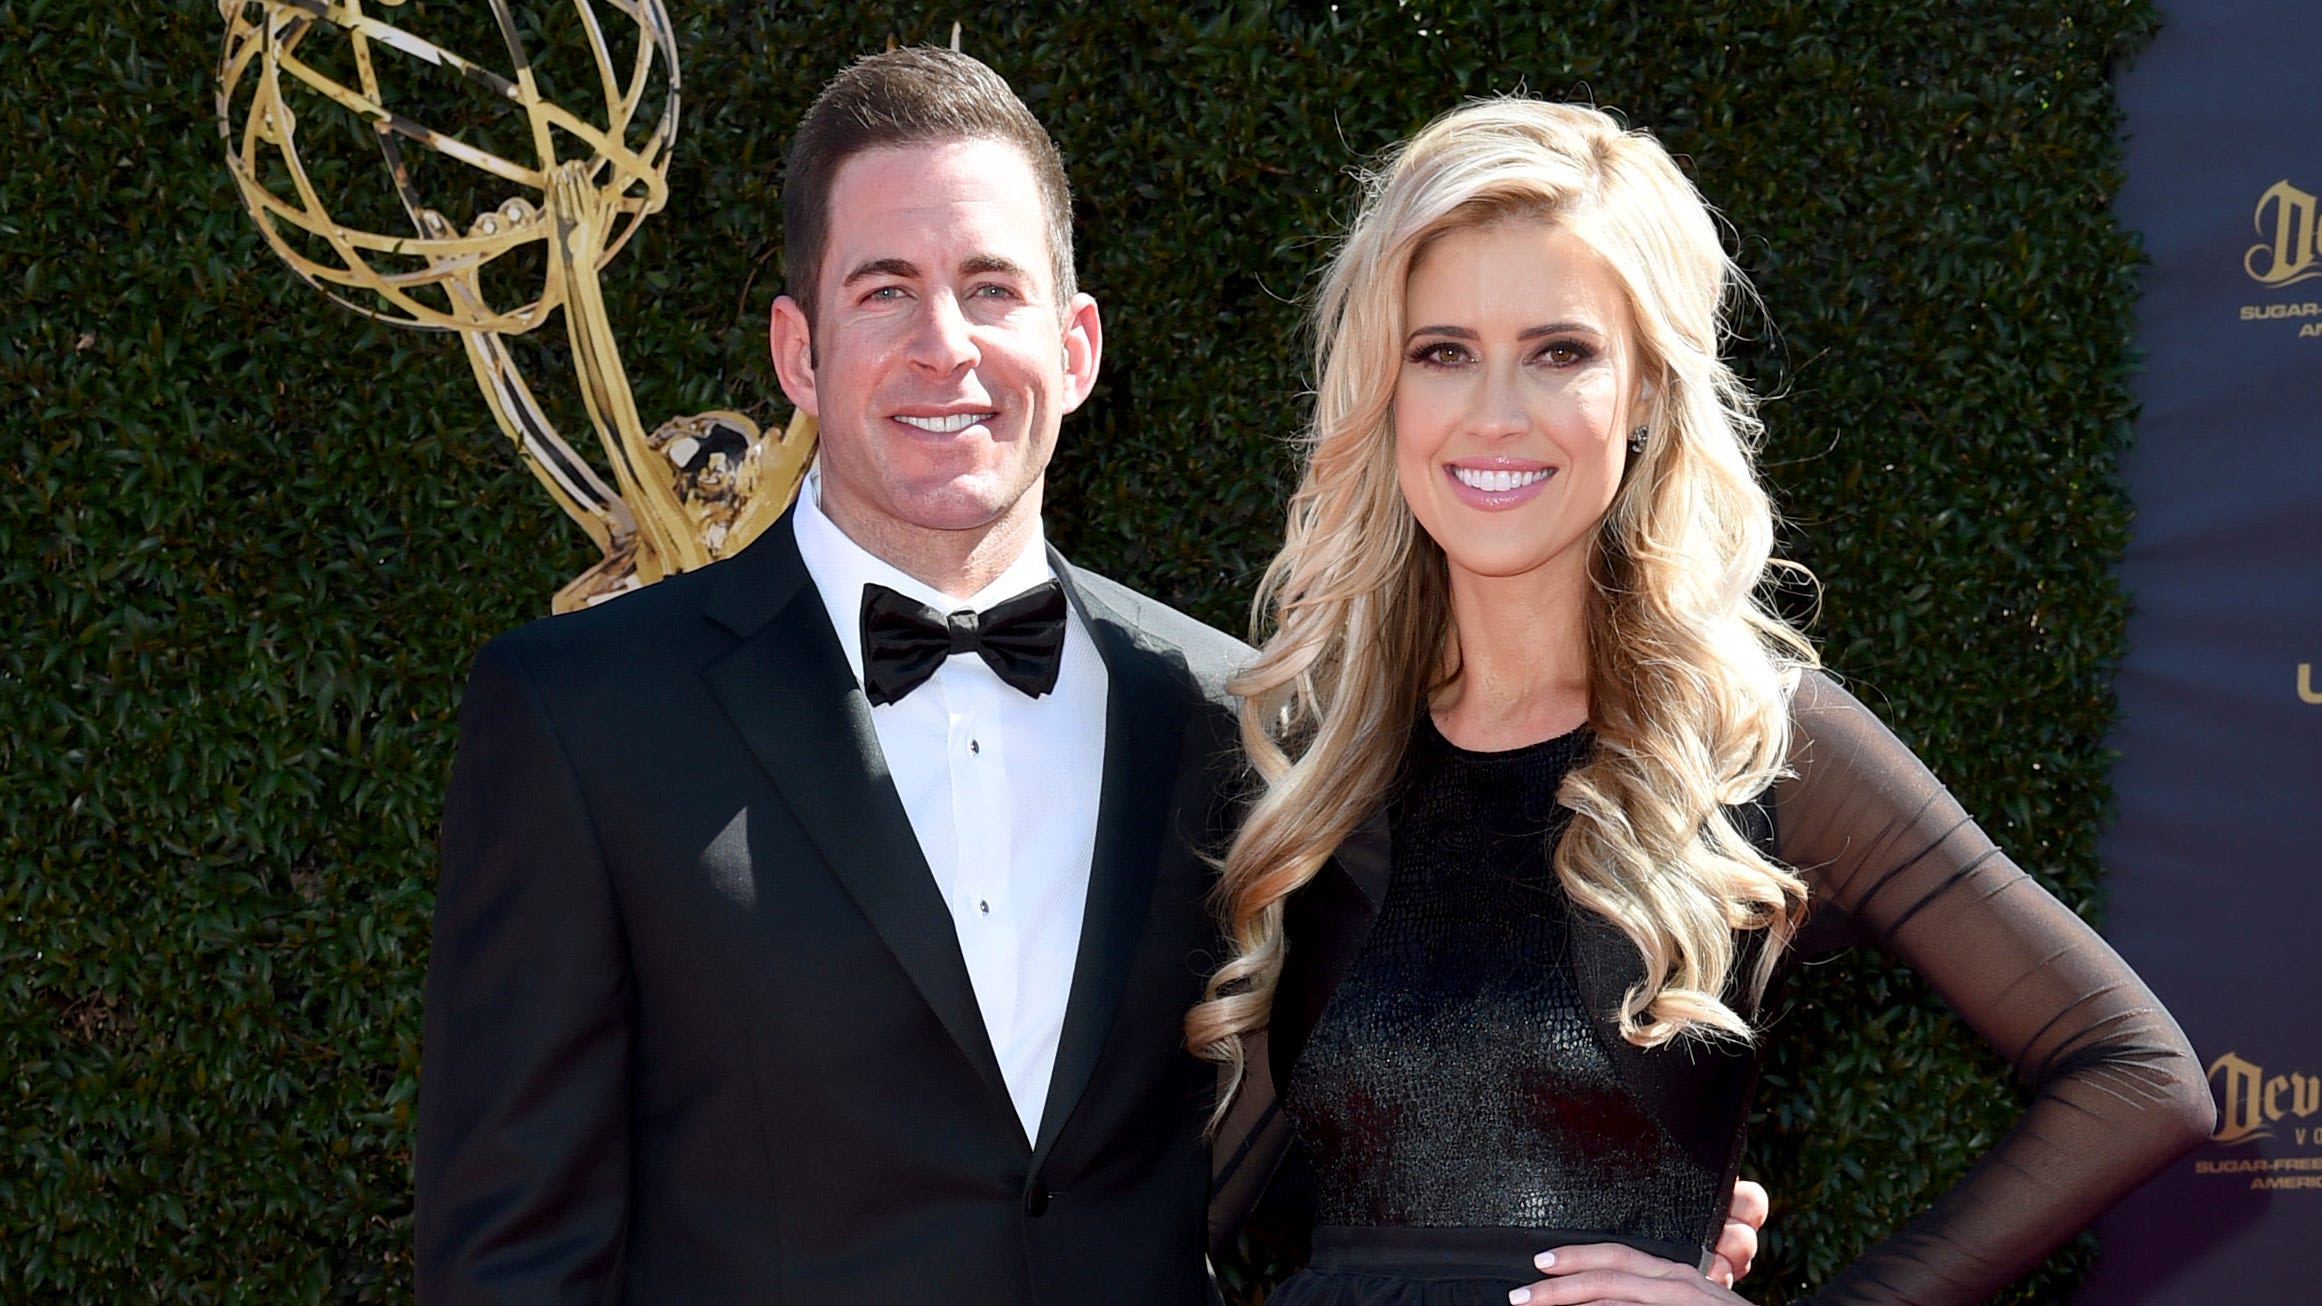 'Flip or Flop' stars Christina Hall and Tarek El Moussa reunite for HGTV show with spouses